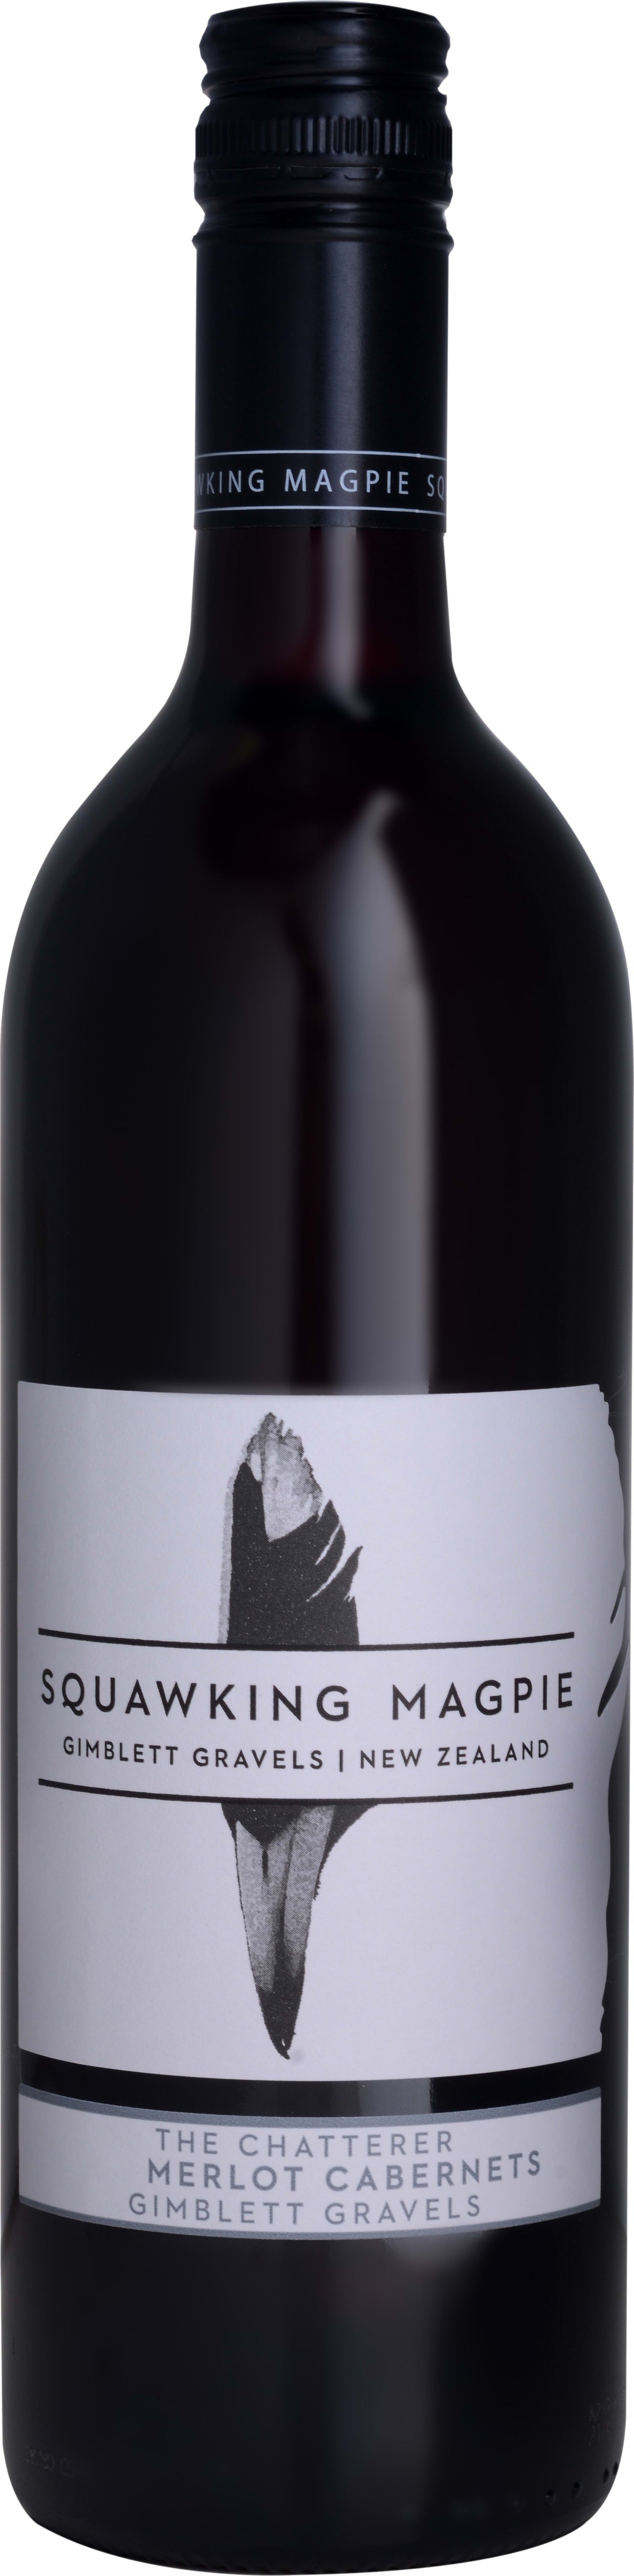 Squawking Magpie The Chatterer Merlot Cabernets 2020 75cl - Buy Squawking Magpie Wines from GREAT WINES DIRECT wine shop